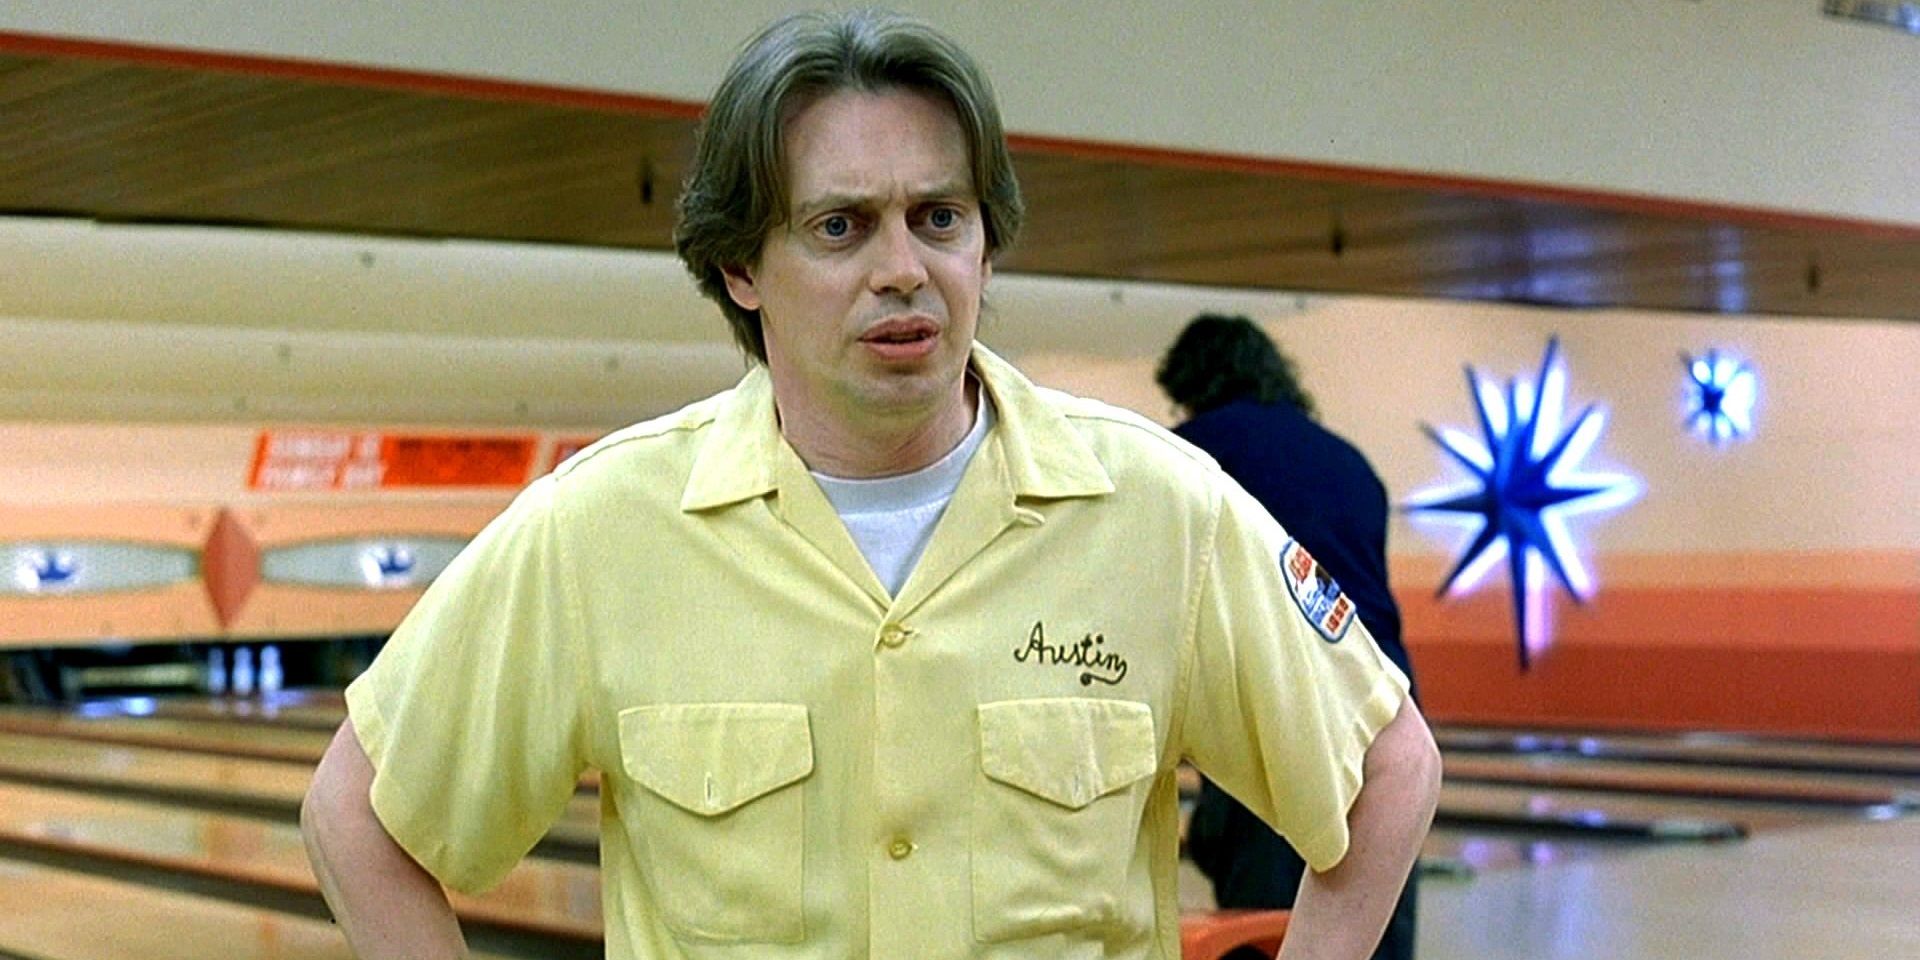 Donny in the bowling alley in The Big Lebowski